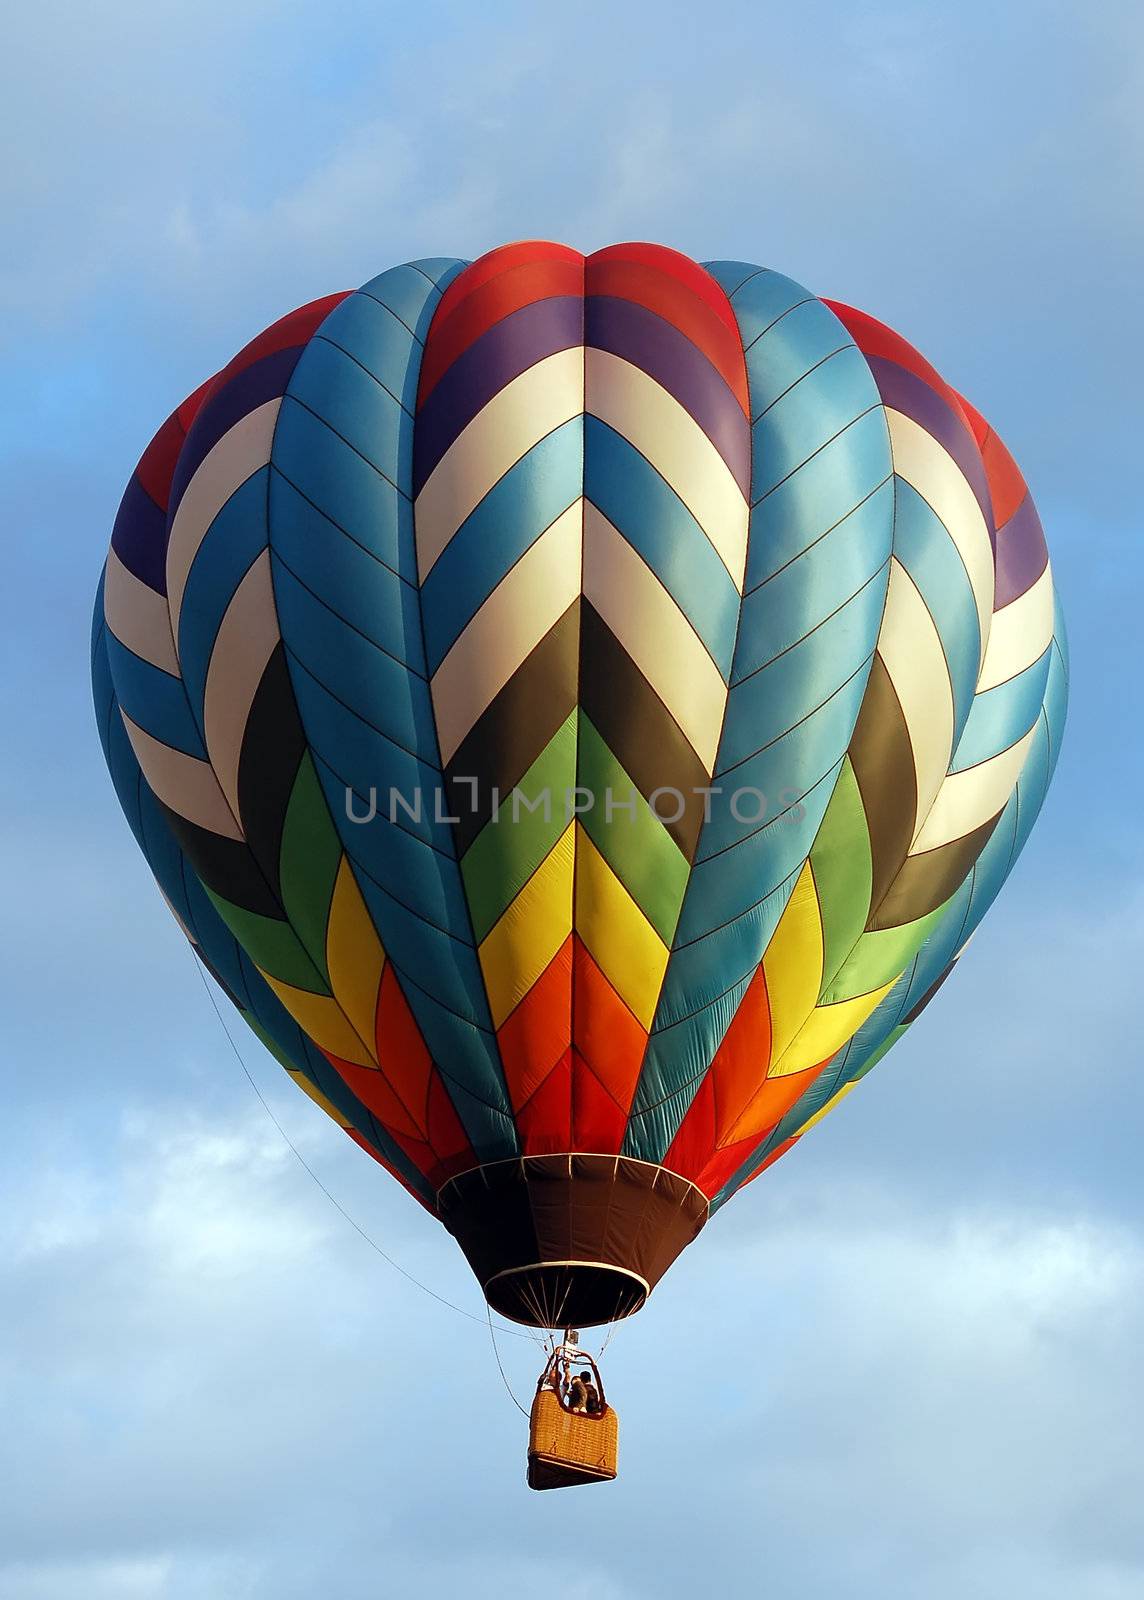 A colorful Hot Air Balloon taking off 